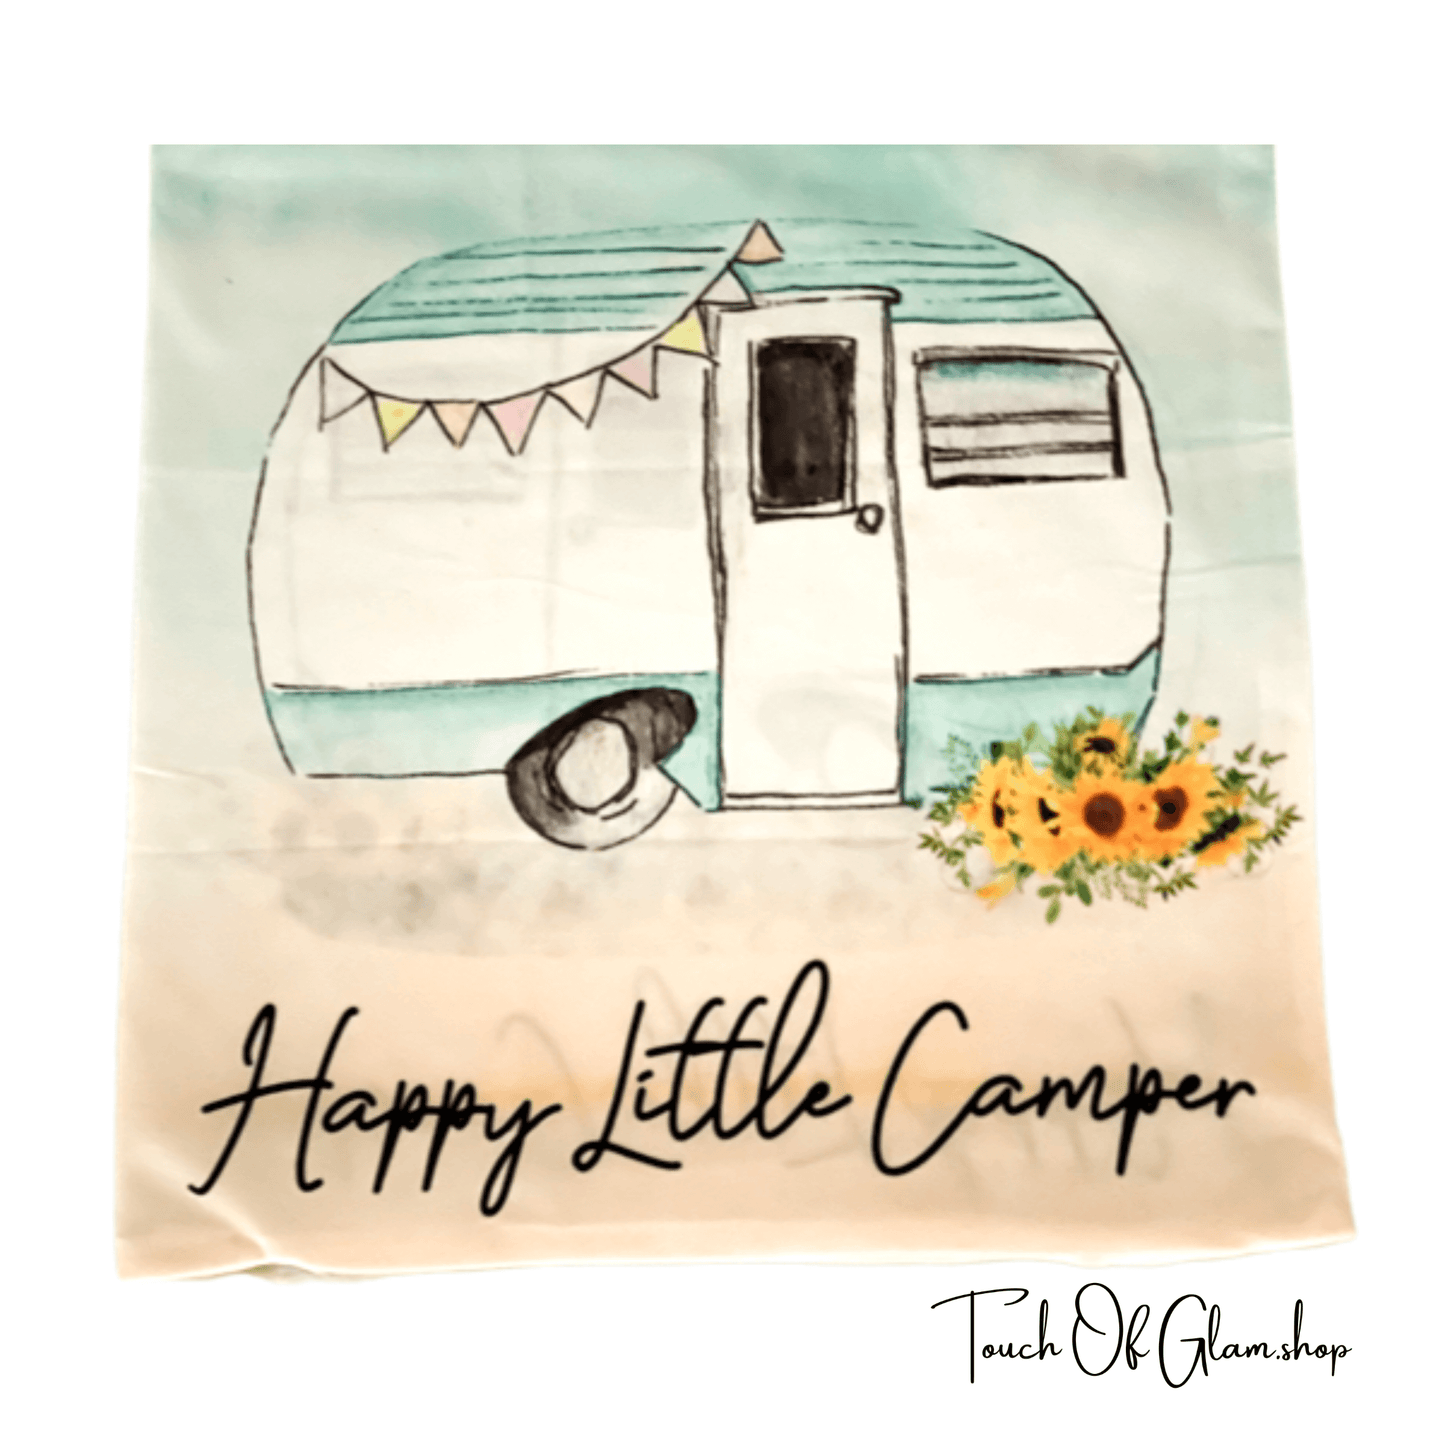 Wholesale Throw Pillow: Happy Little Camper 18" x 18"